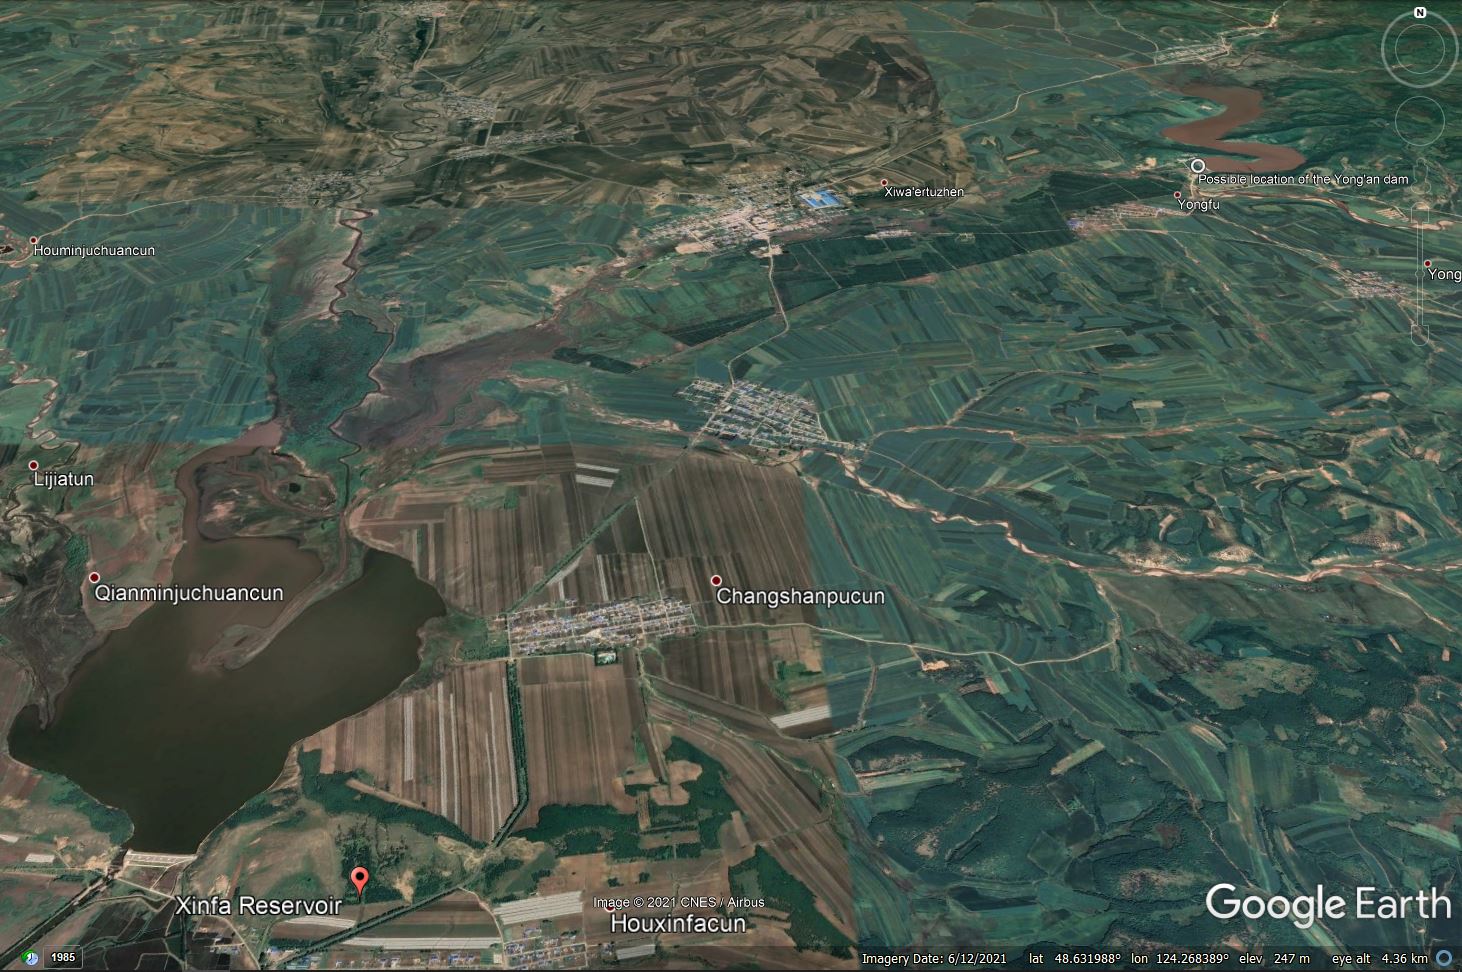 Google Earth image of the Xinfa Dam and the possible Yong-an Dam in Hulunbuir, Inner Mongolia, China, which collapsed on 18 July 2021.